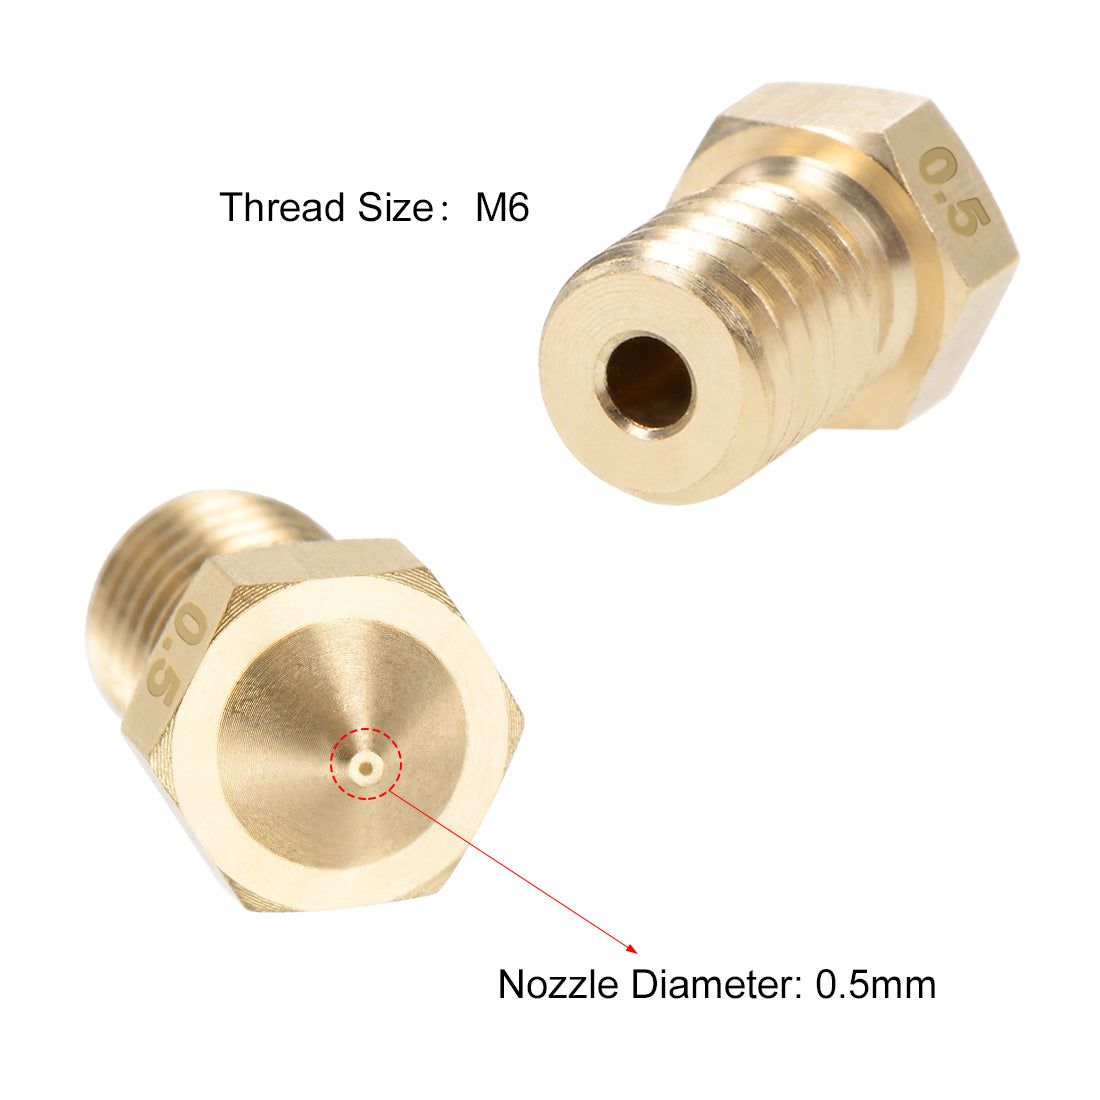 uxcell Uxcell 0.5mm 3D Printer Nozzle Head M6 for V5 V6 1.75mm Extruder Print, Brass 5pcs